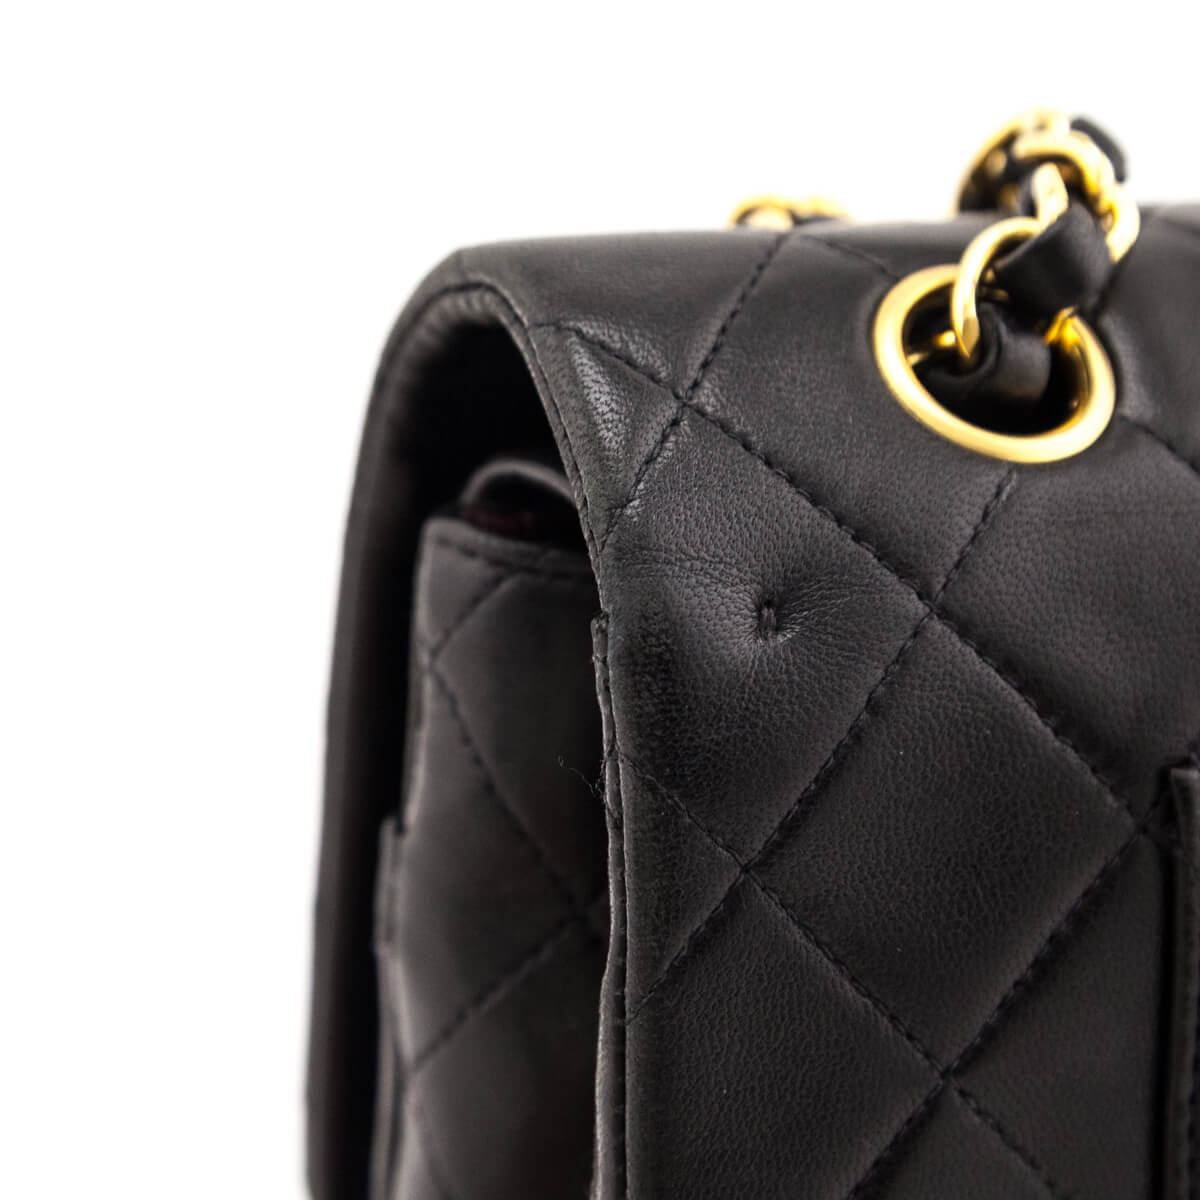 Chanel Black Quilted Lambskin Vintage Medium Classic Double Flap Bag - Love that Bag etc - Preowned Authentic Designer Handbags & Preloved Fashions